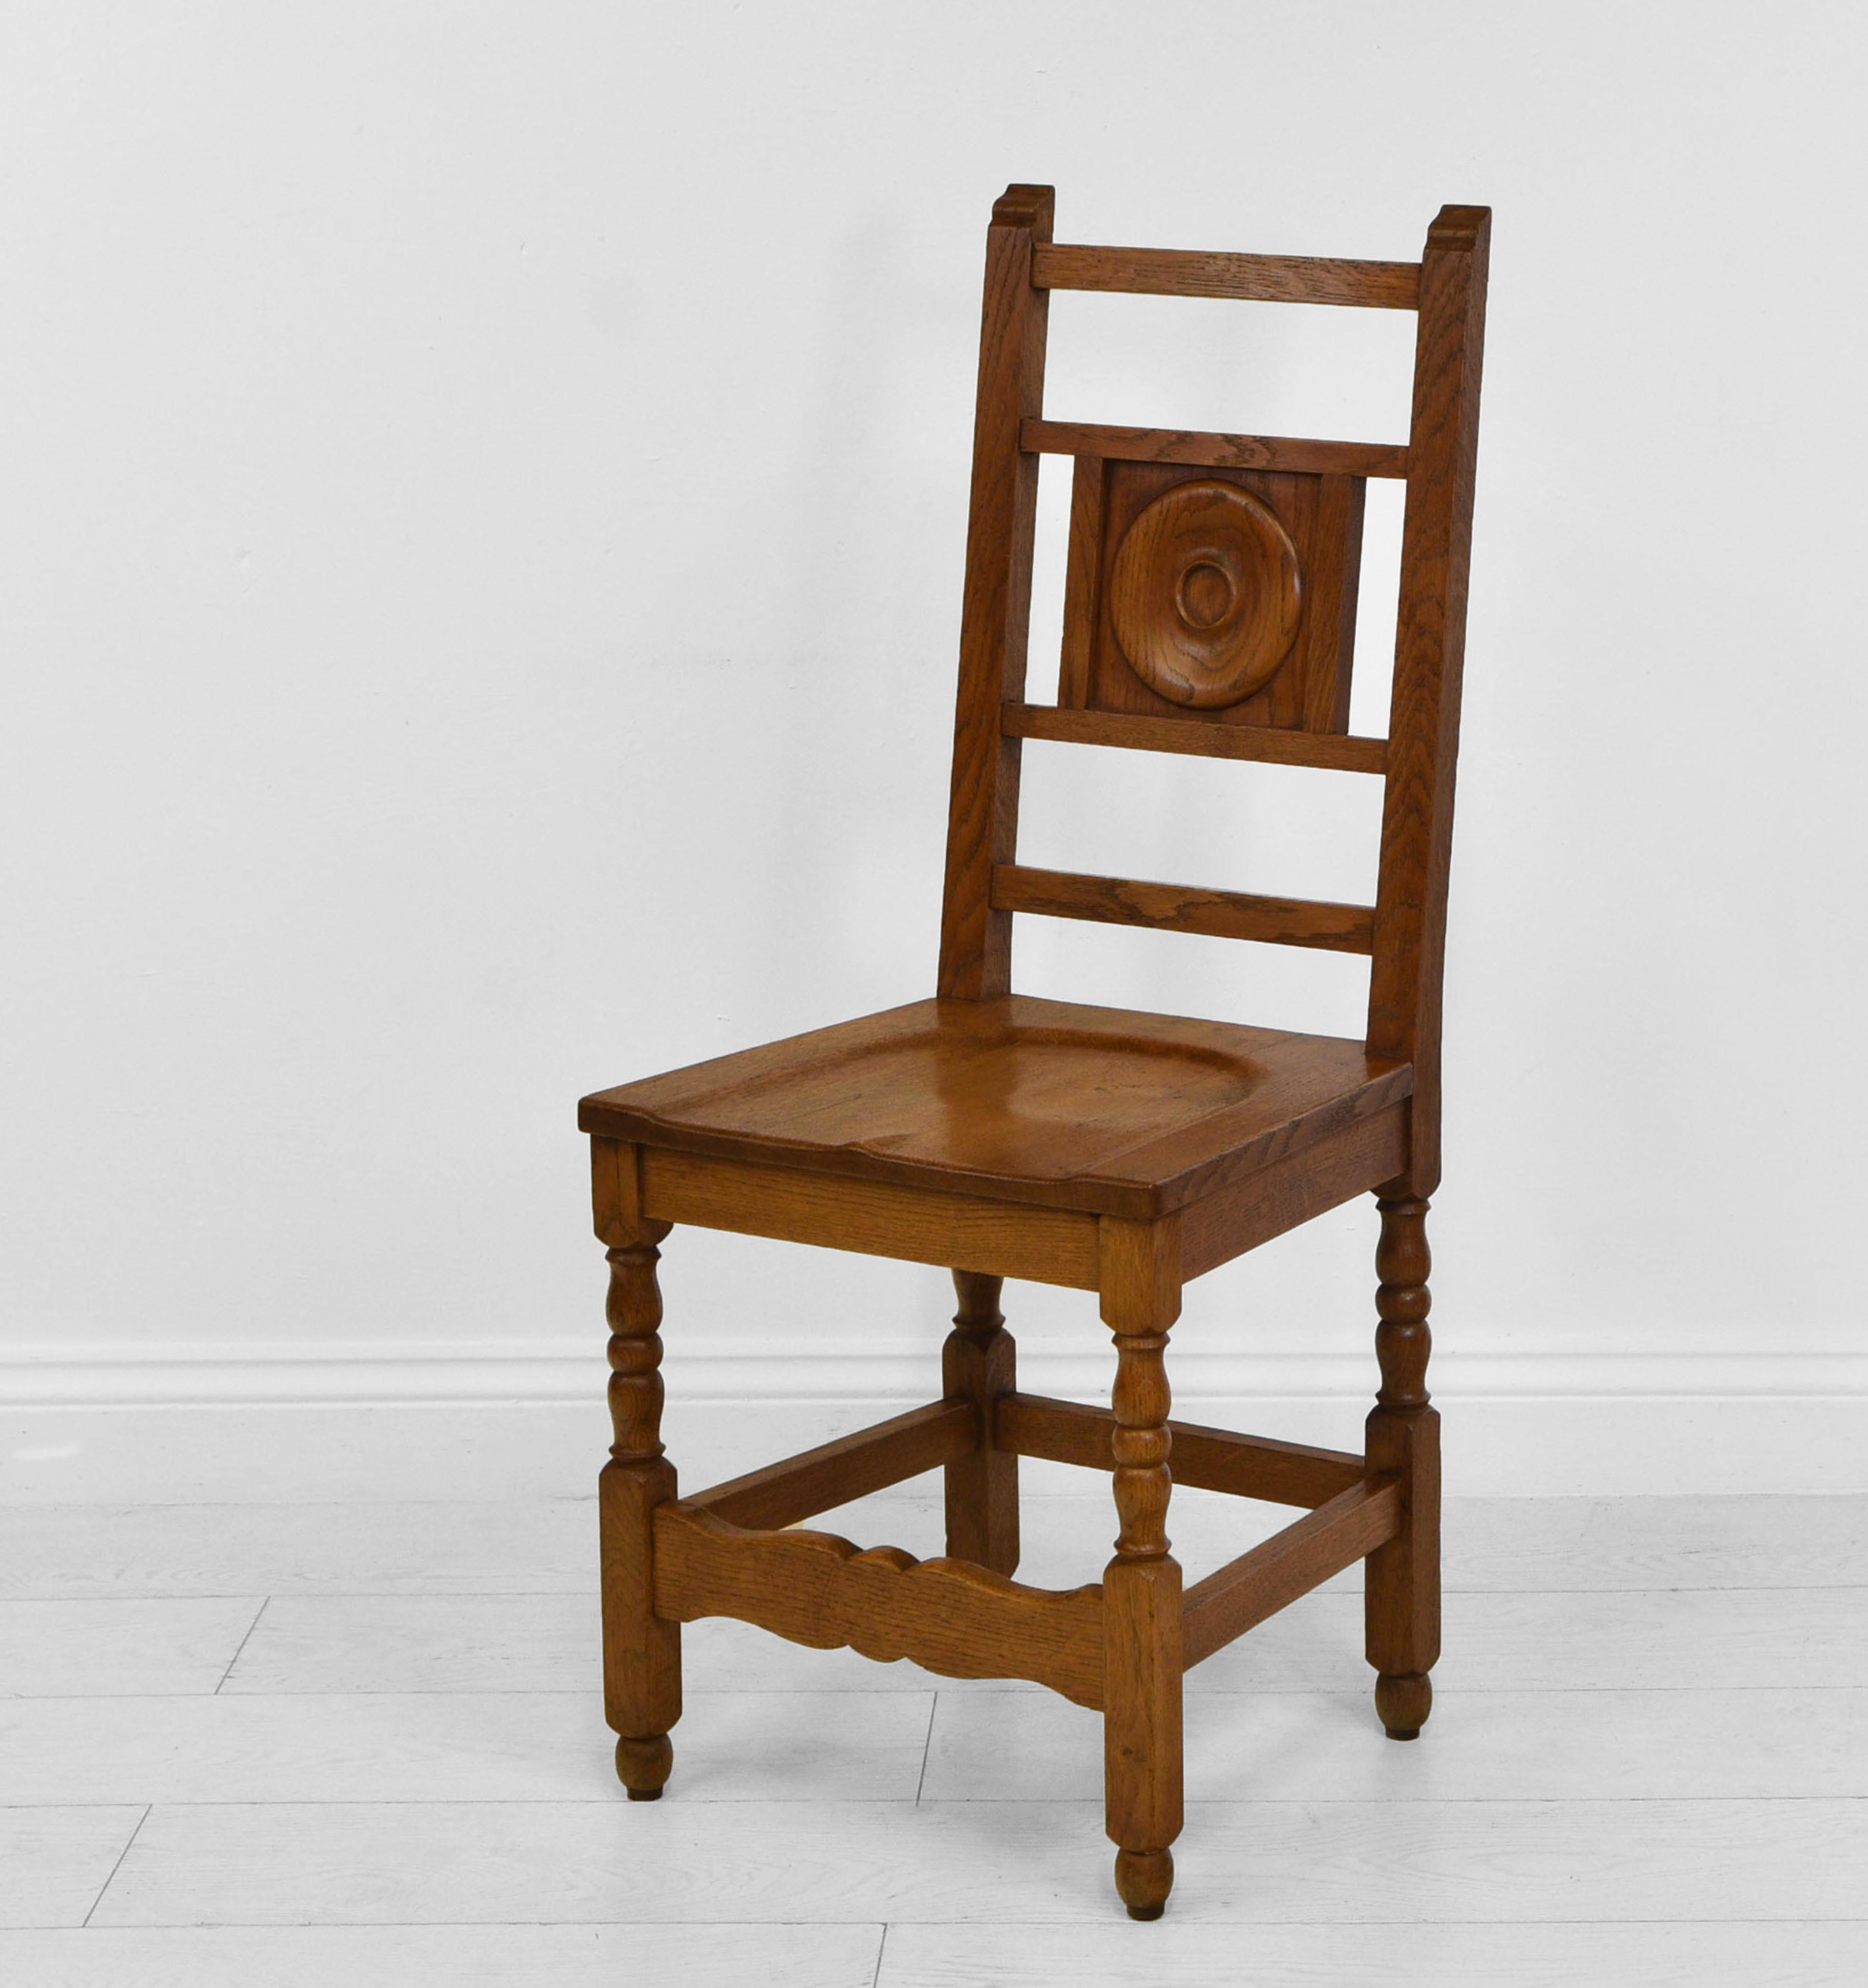 Set of eight oak chairs in the Heal's manner, reputably from the University of Cambridge. Circa 1930.

The chairs are made in solid oak and have shaped seats, making for comfy seating. Overall they are in very good condition for their age, showing